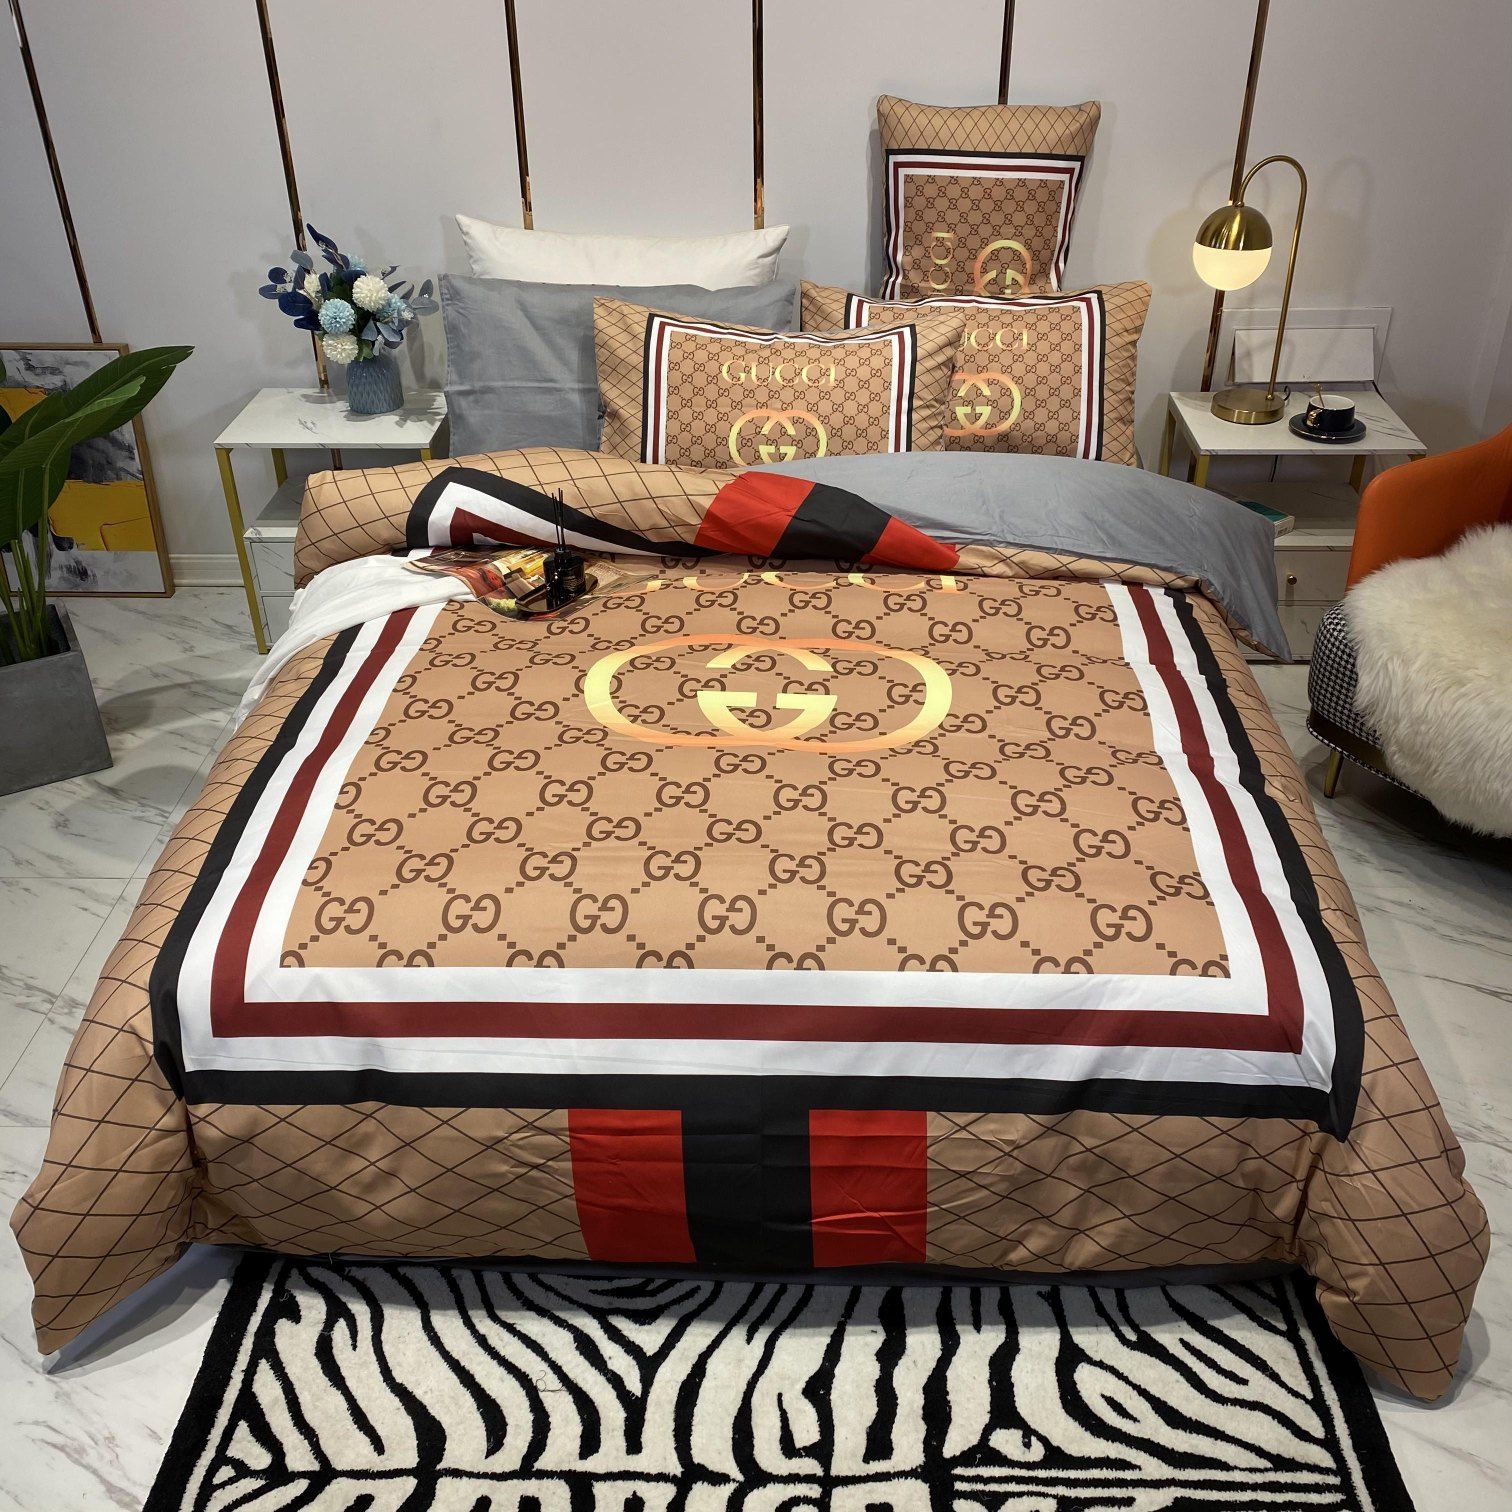 Luxury Gc Gucci Type 156 Bedding Sets Duvet Cover Luxury Brand Bedroom Sets